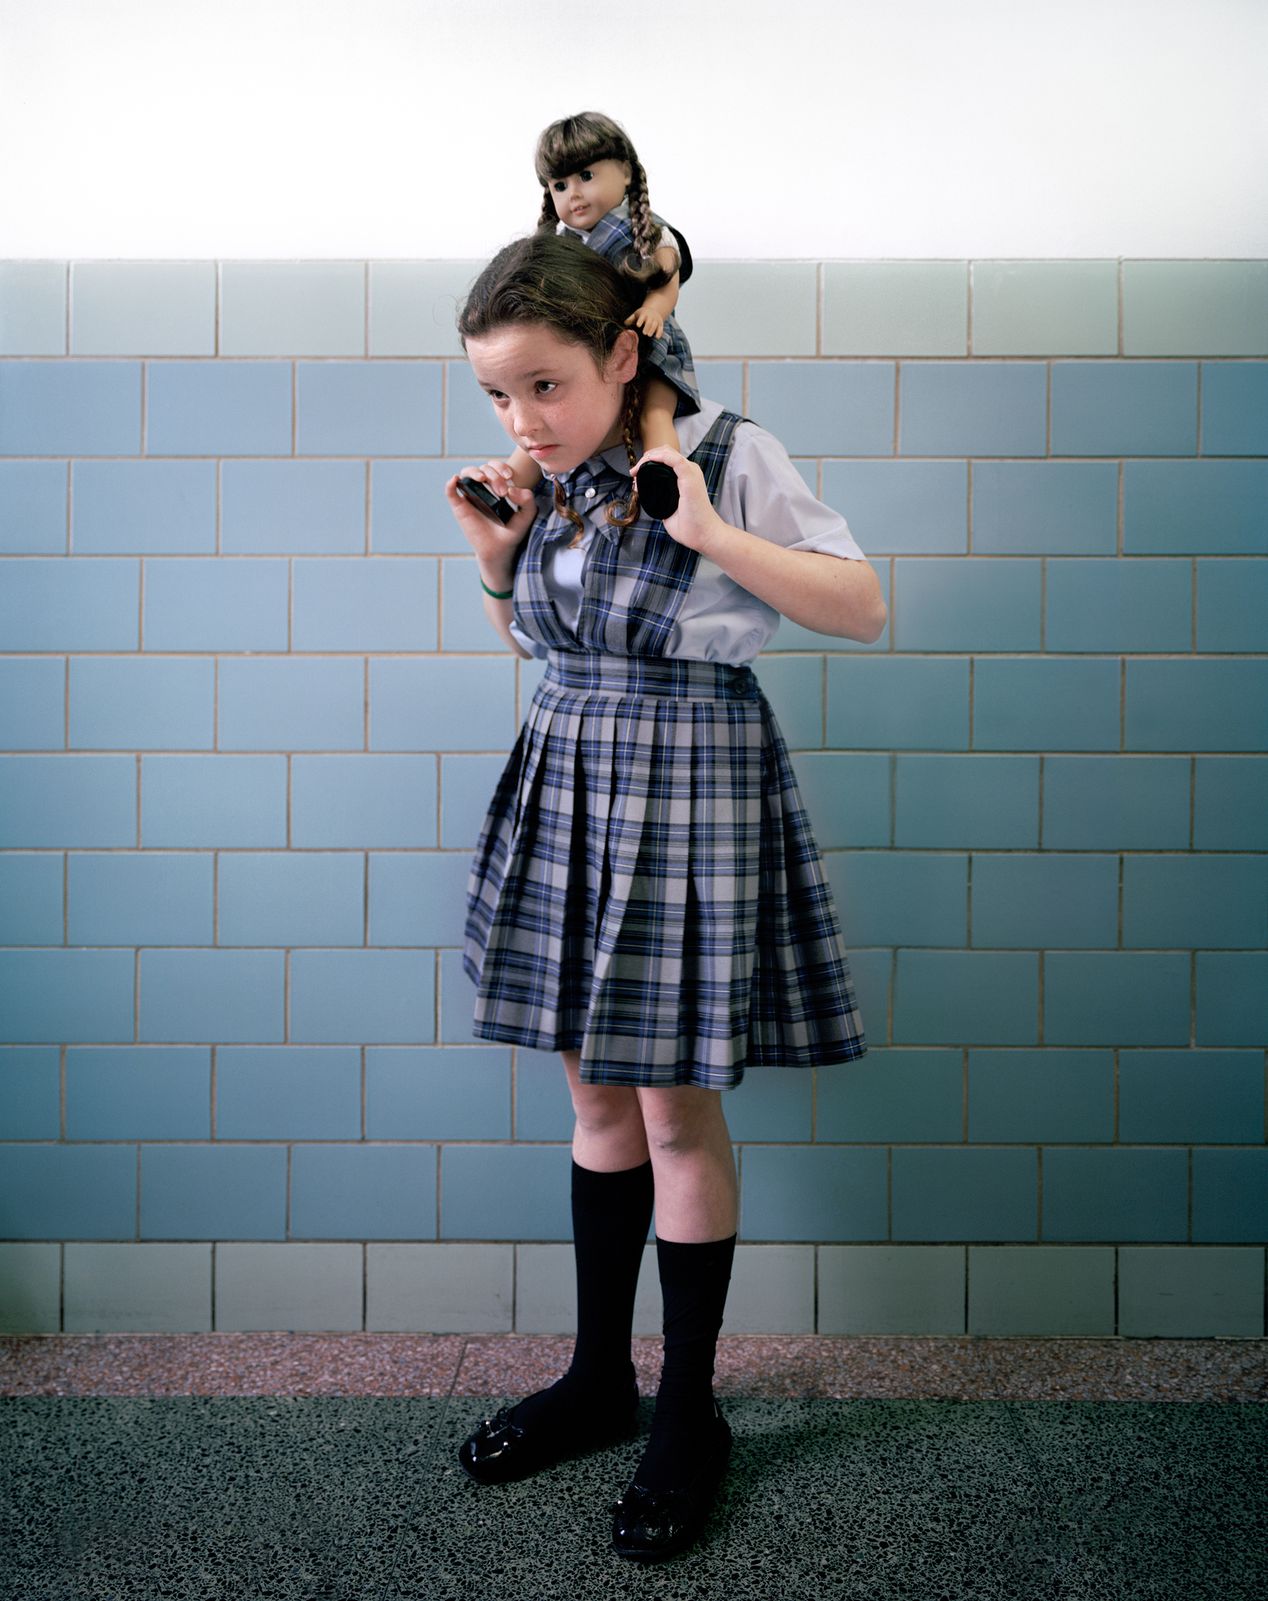 A young schoolgirl giving her lookalike doll a piggyback ride, environmental portrait photography, Ilona Szwarc, contemporary Los Angeles artist.